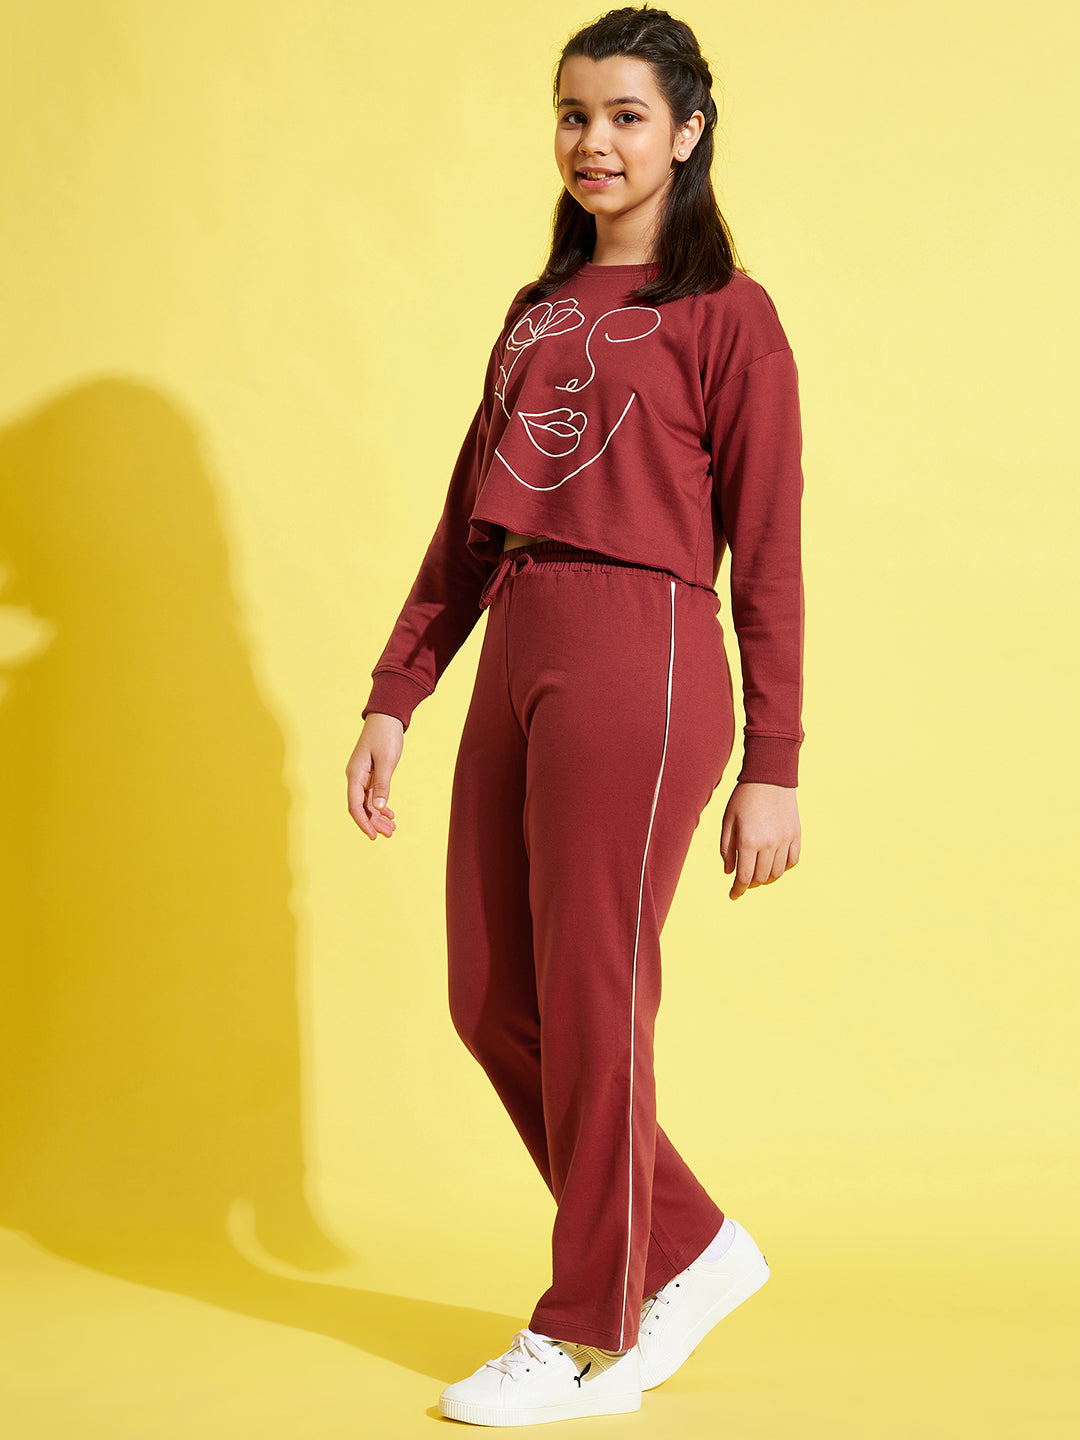 Girls Rust Face Embroidery Sweatshirt with Track Pants